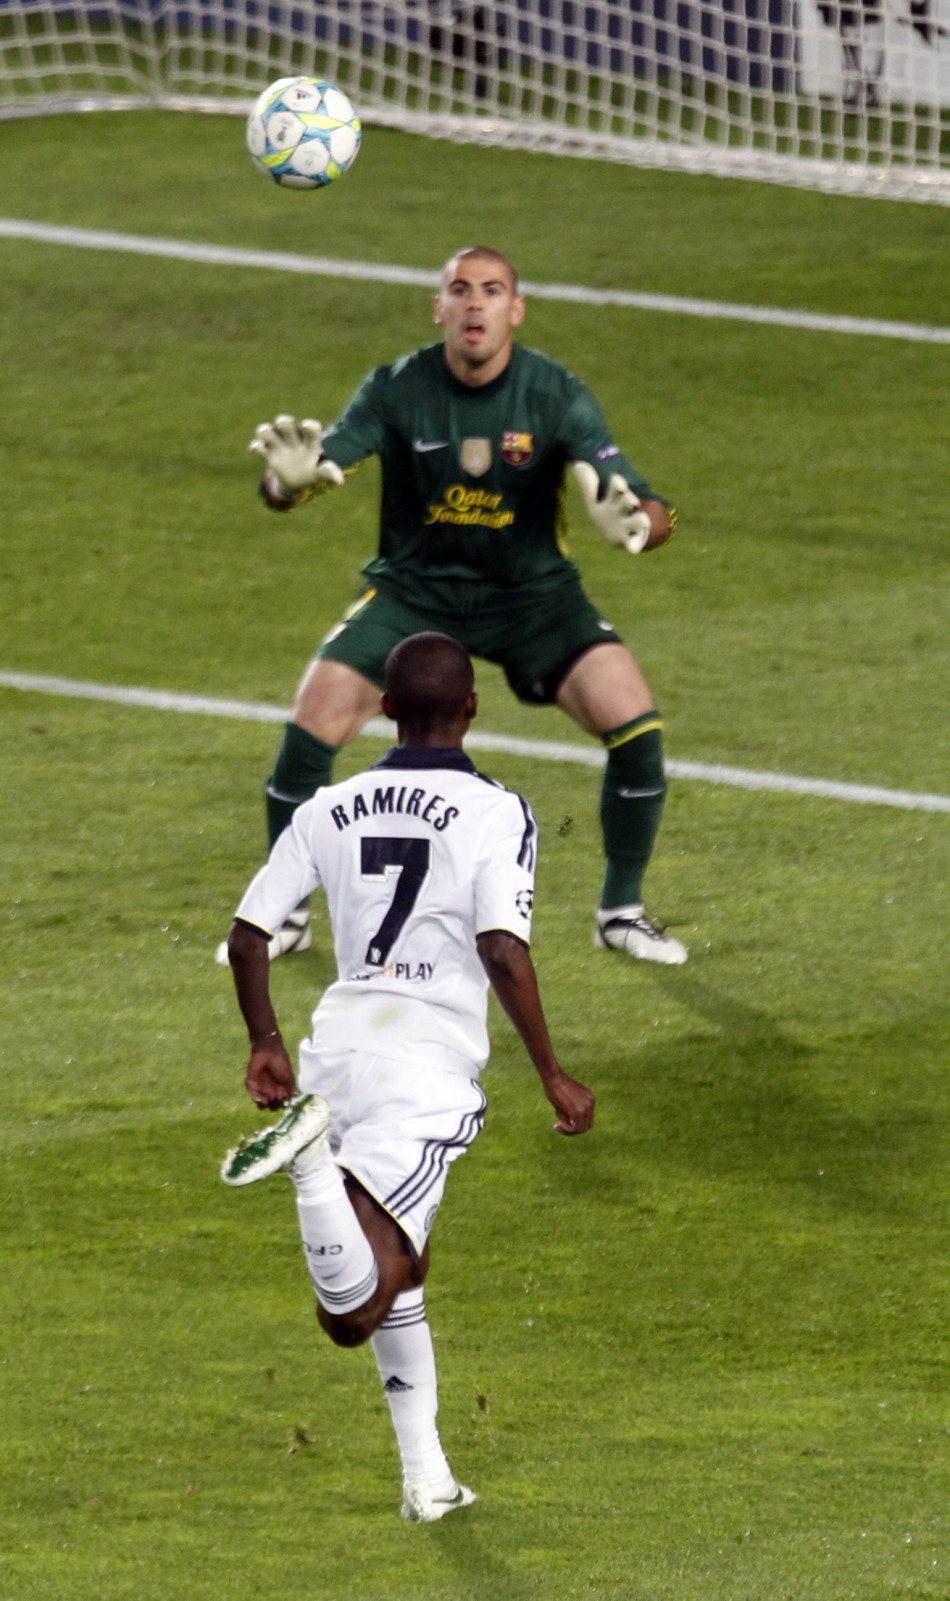 Chelsea039s Ramires scores a goal over Barcelona039s Valdes during their Champions League soccer semi-final in Barcelona